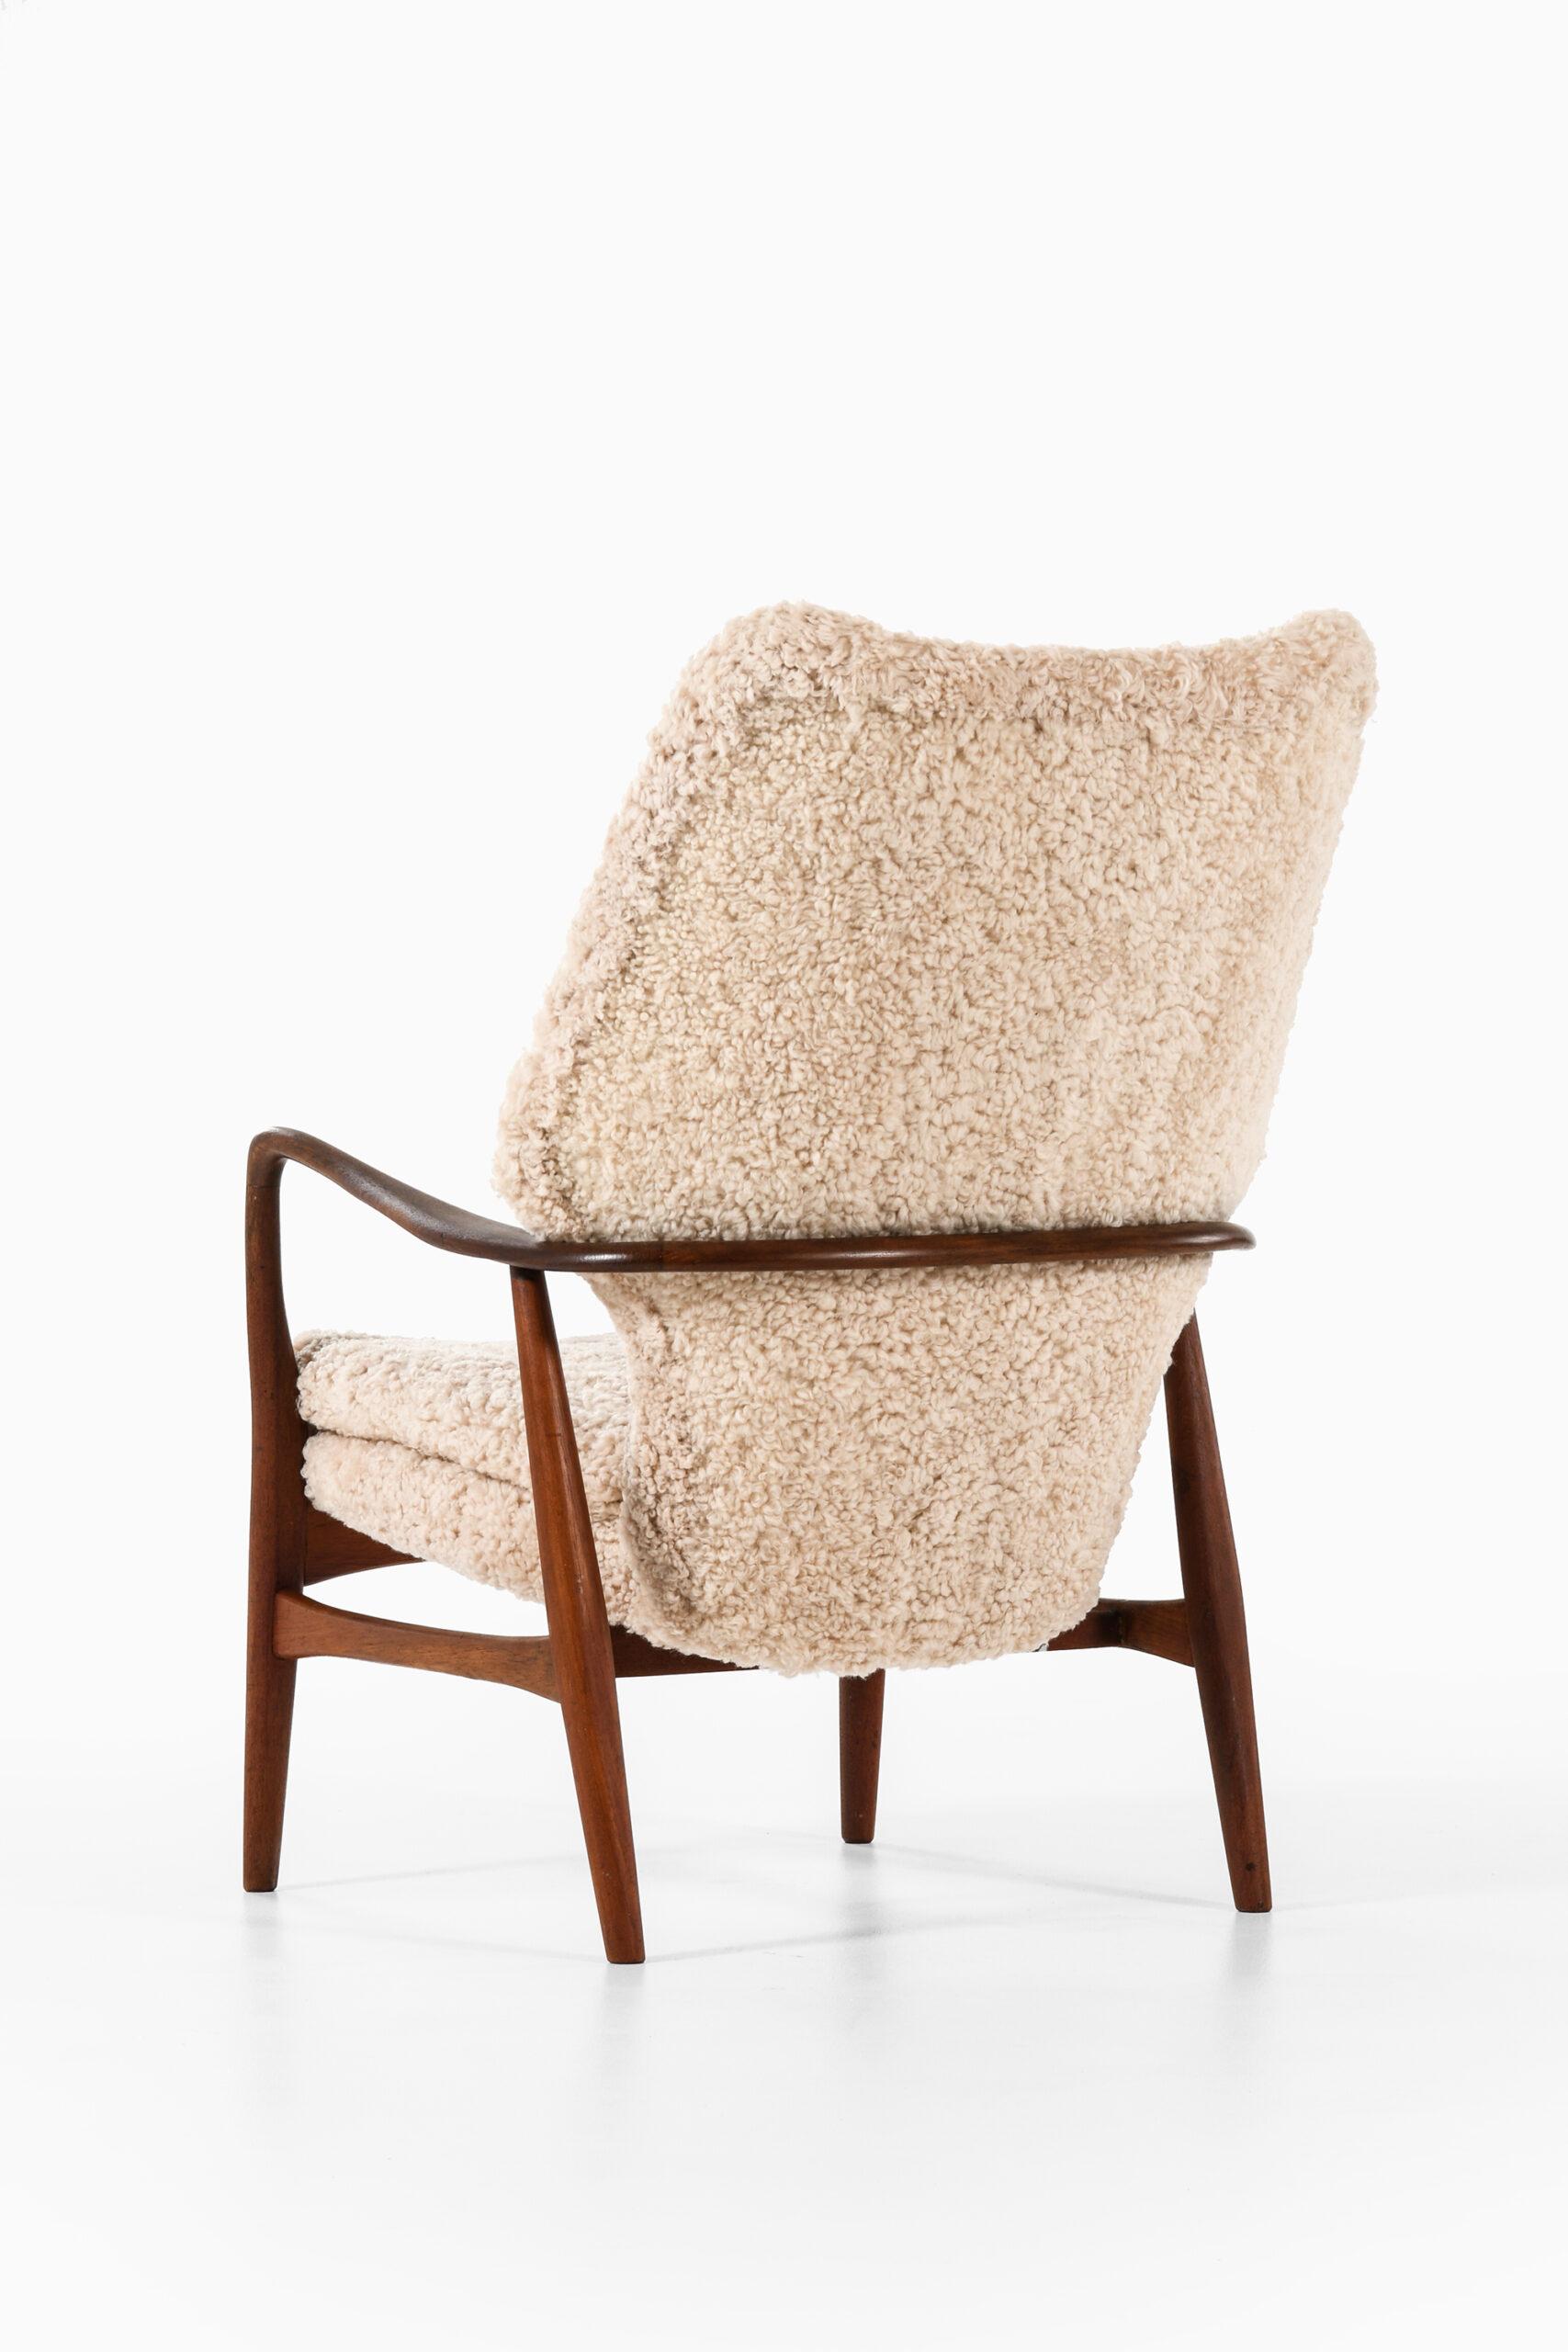 Mid-20th Century Henry Schubell Easy Chair Model Ms-6 Produced by Madsen & Schubell For Sale